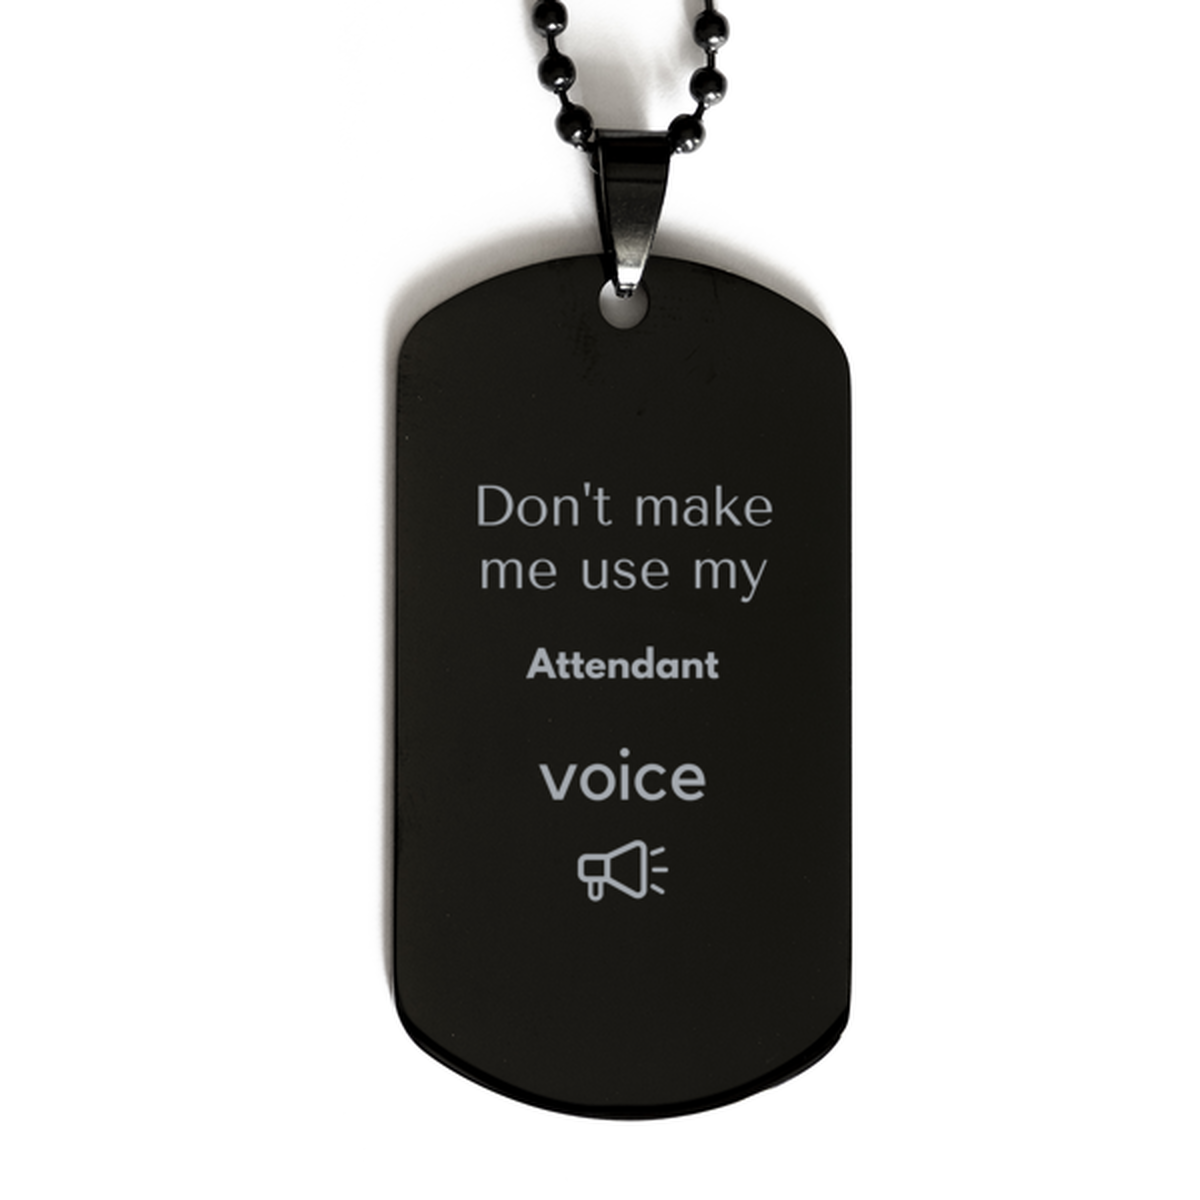 Don't make me use my Attendant voice, Sarcasm Attendant Gifts, Christmas Attendant Black Dog Tag Birthday Unique Gifts For Attendant Coworkers, Men, Women, Colleague, Friends